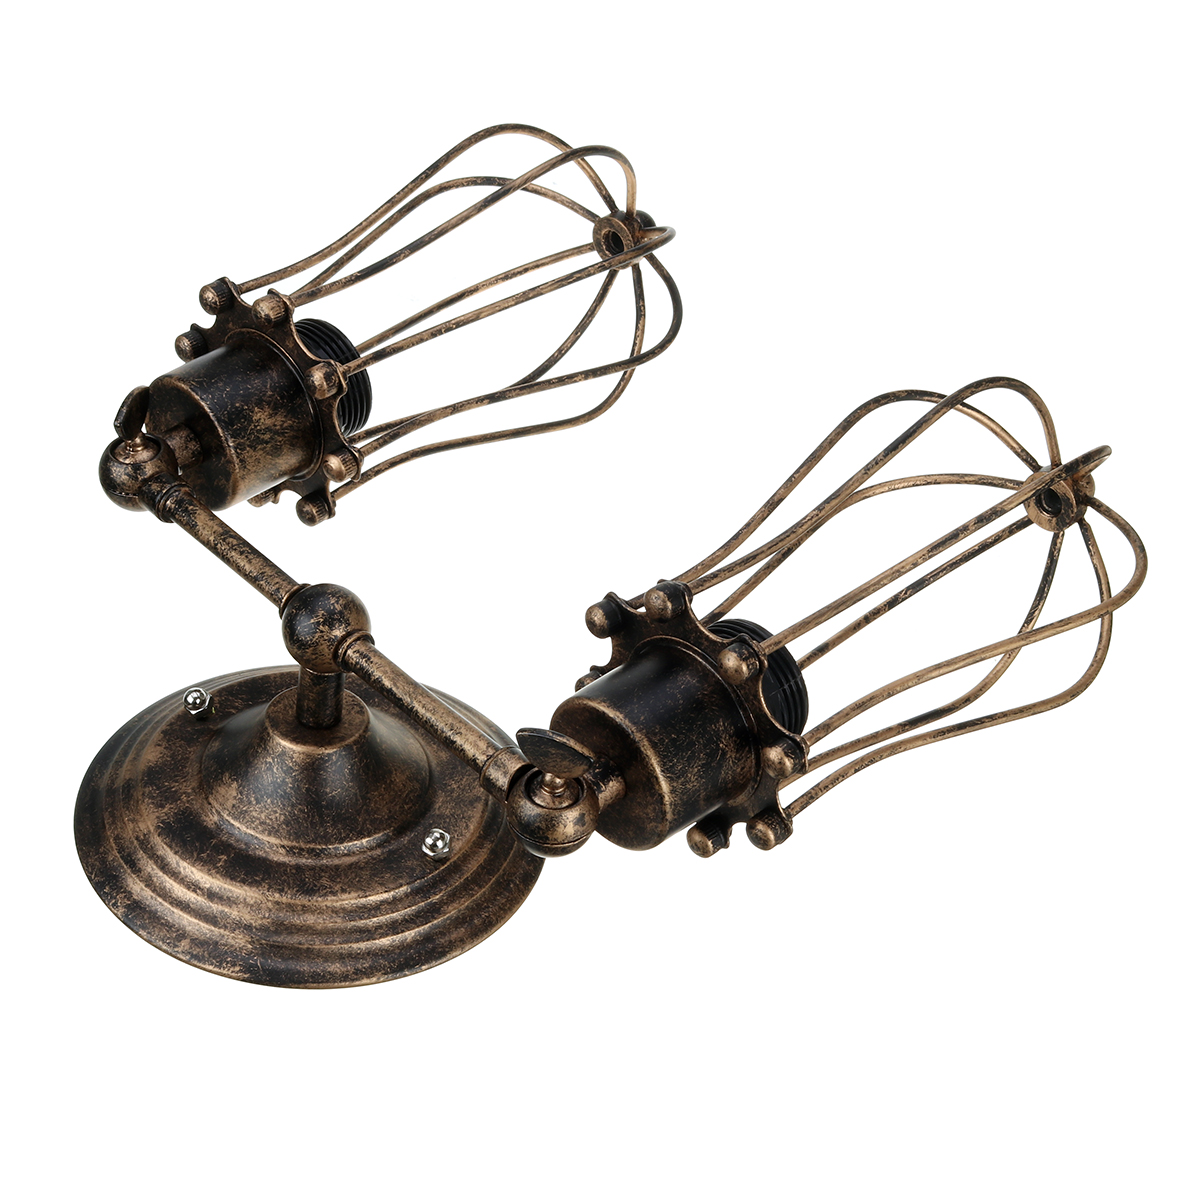 Vintage-Industrial-Wall-mounted-Metal-Cage-Wall-Sconce-Lampshade-Light-Shade-Without-Bulb-1721820-10